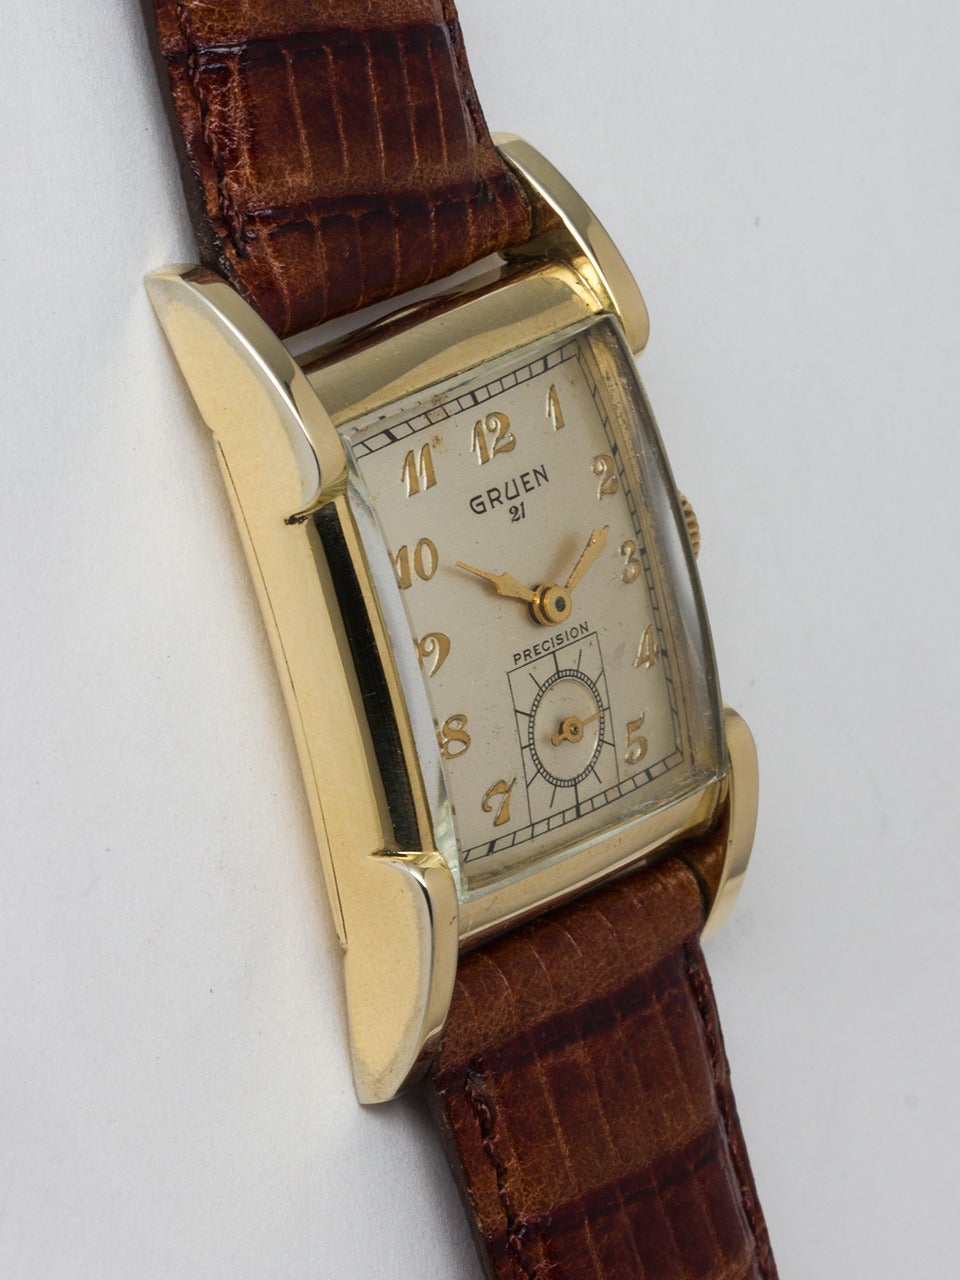 Gruen Yellow Gold Filled 21 Precision Wristwatch circa 1940s. Case measuring 23.5 X 37.5mm with extended lugs. Original silver satin dial with raised Arabic figures and gilt leaf style hands. Powered by 17 jewel manual wind movement with subsidiary